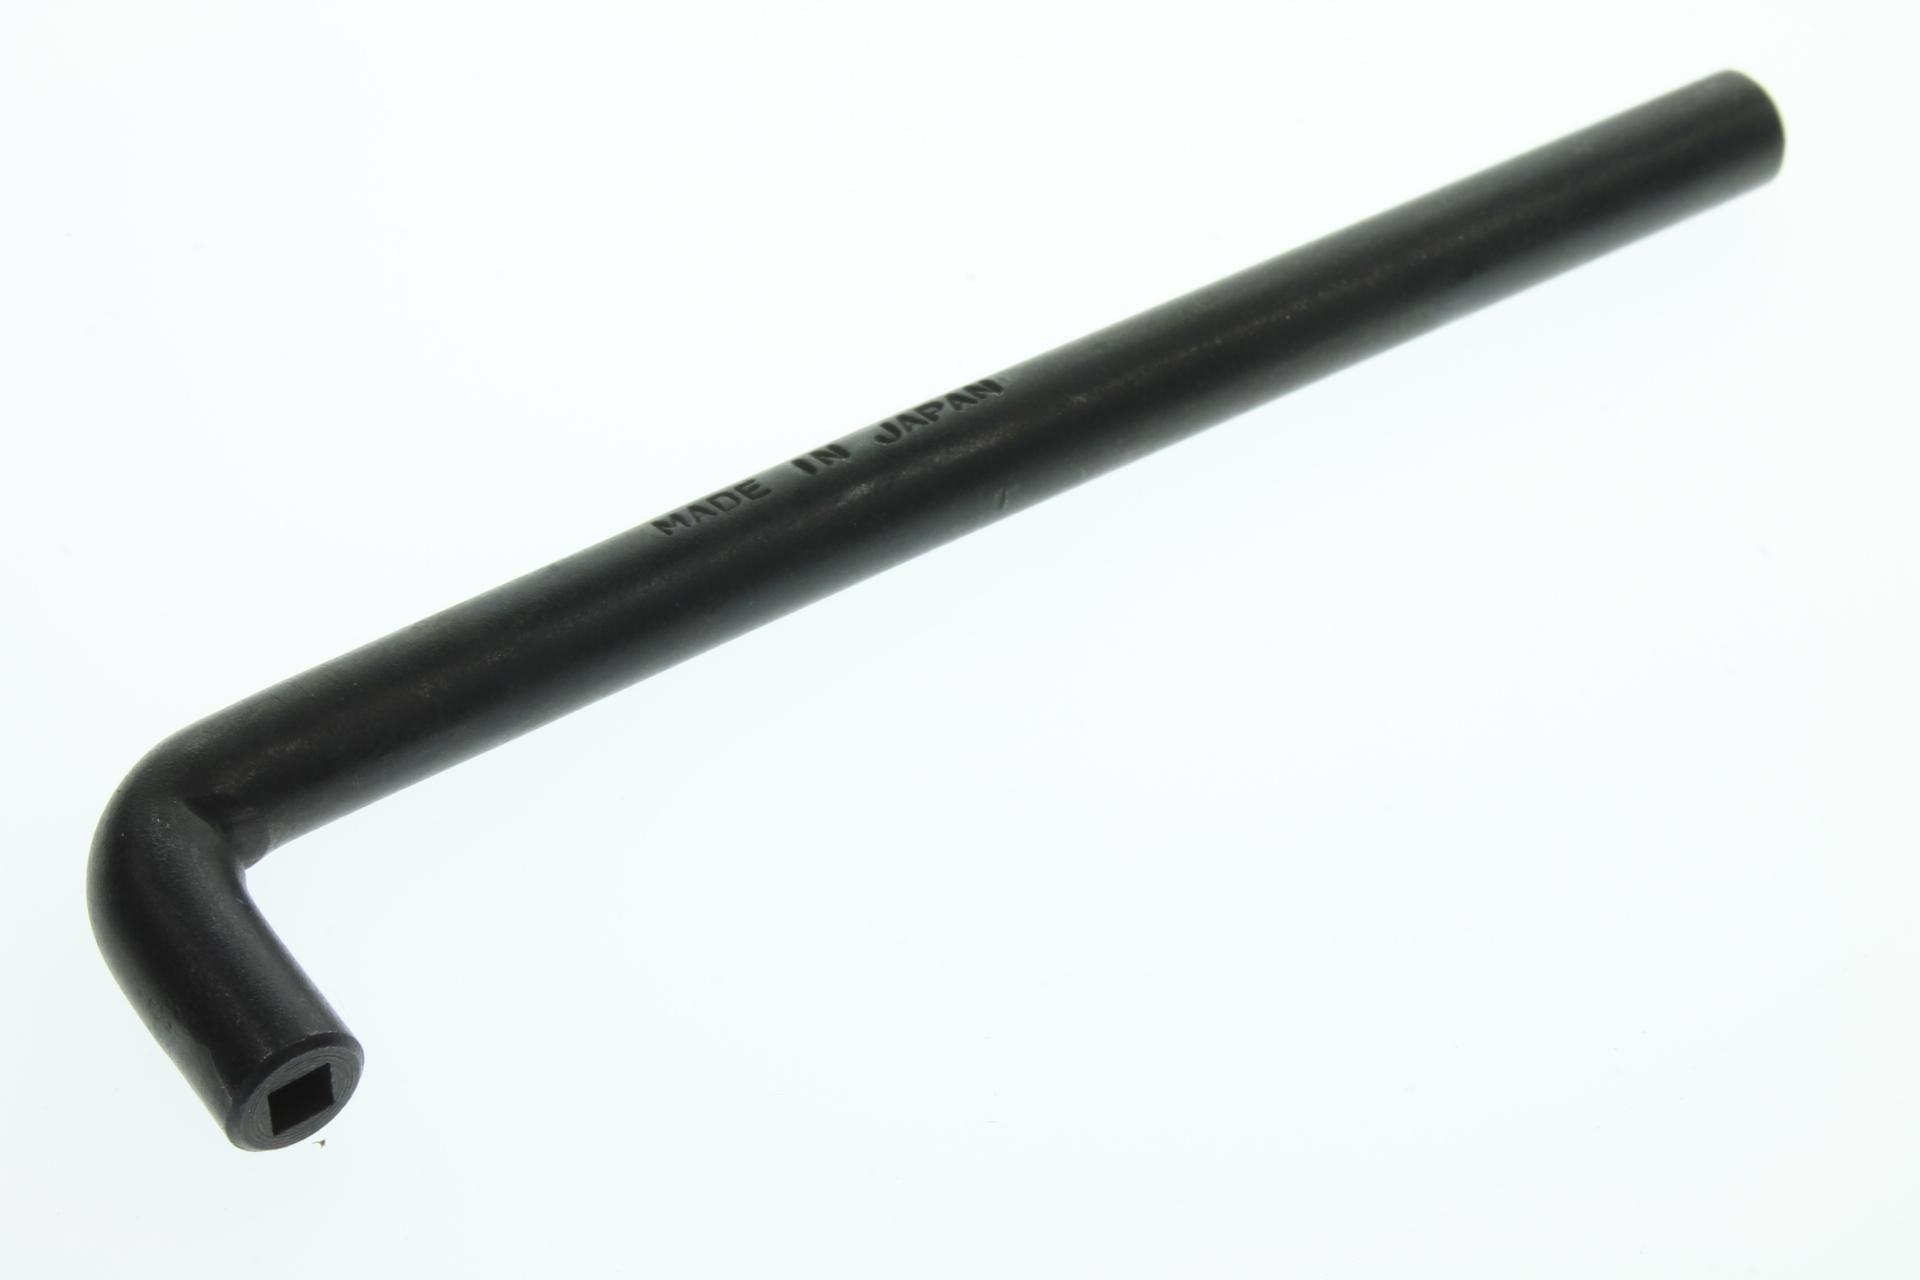 09917-10410 TAPPET ADJUSTER WRENCH